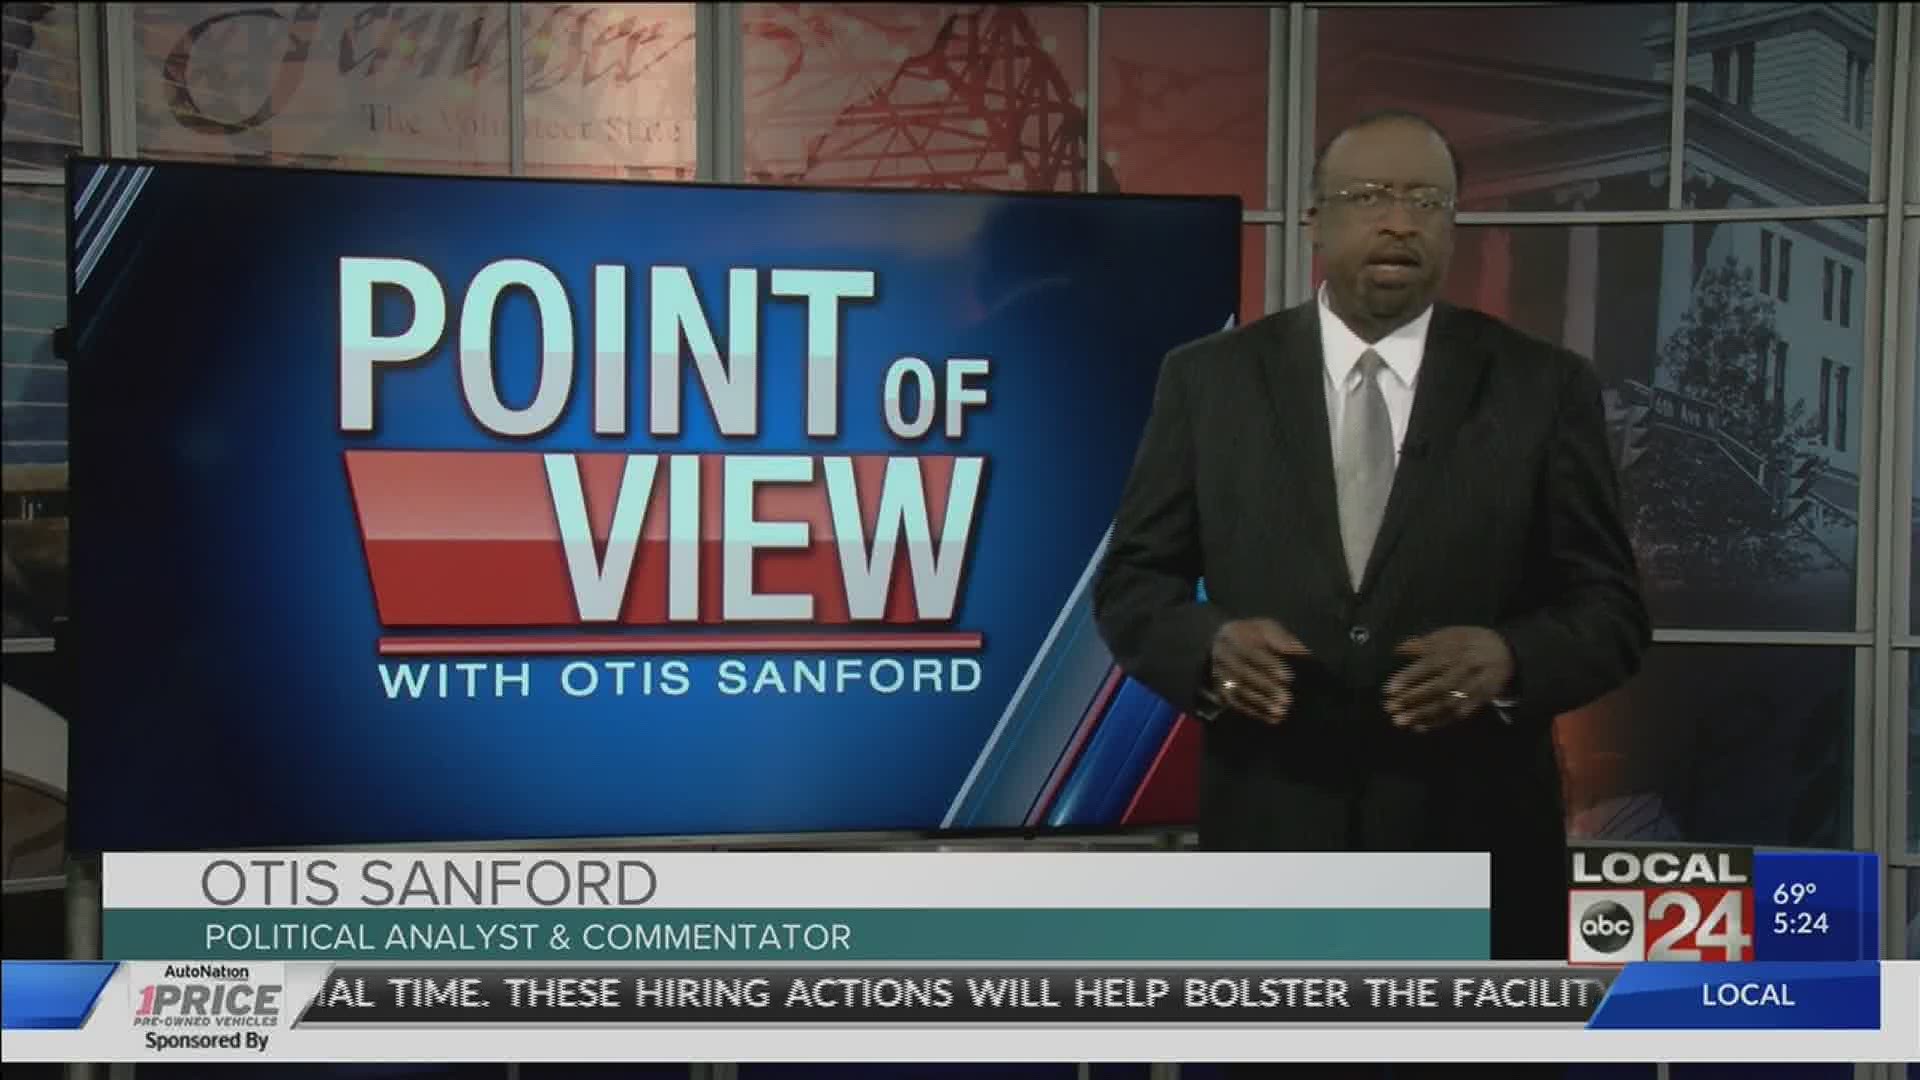 Local 24 News political analyst and commentator Otis Sanford shares his point of view on COVID-19’s impact on African Americans.